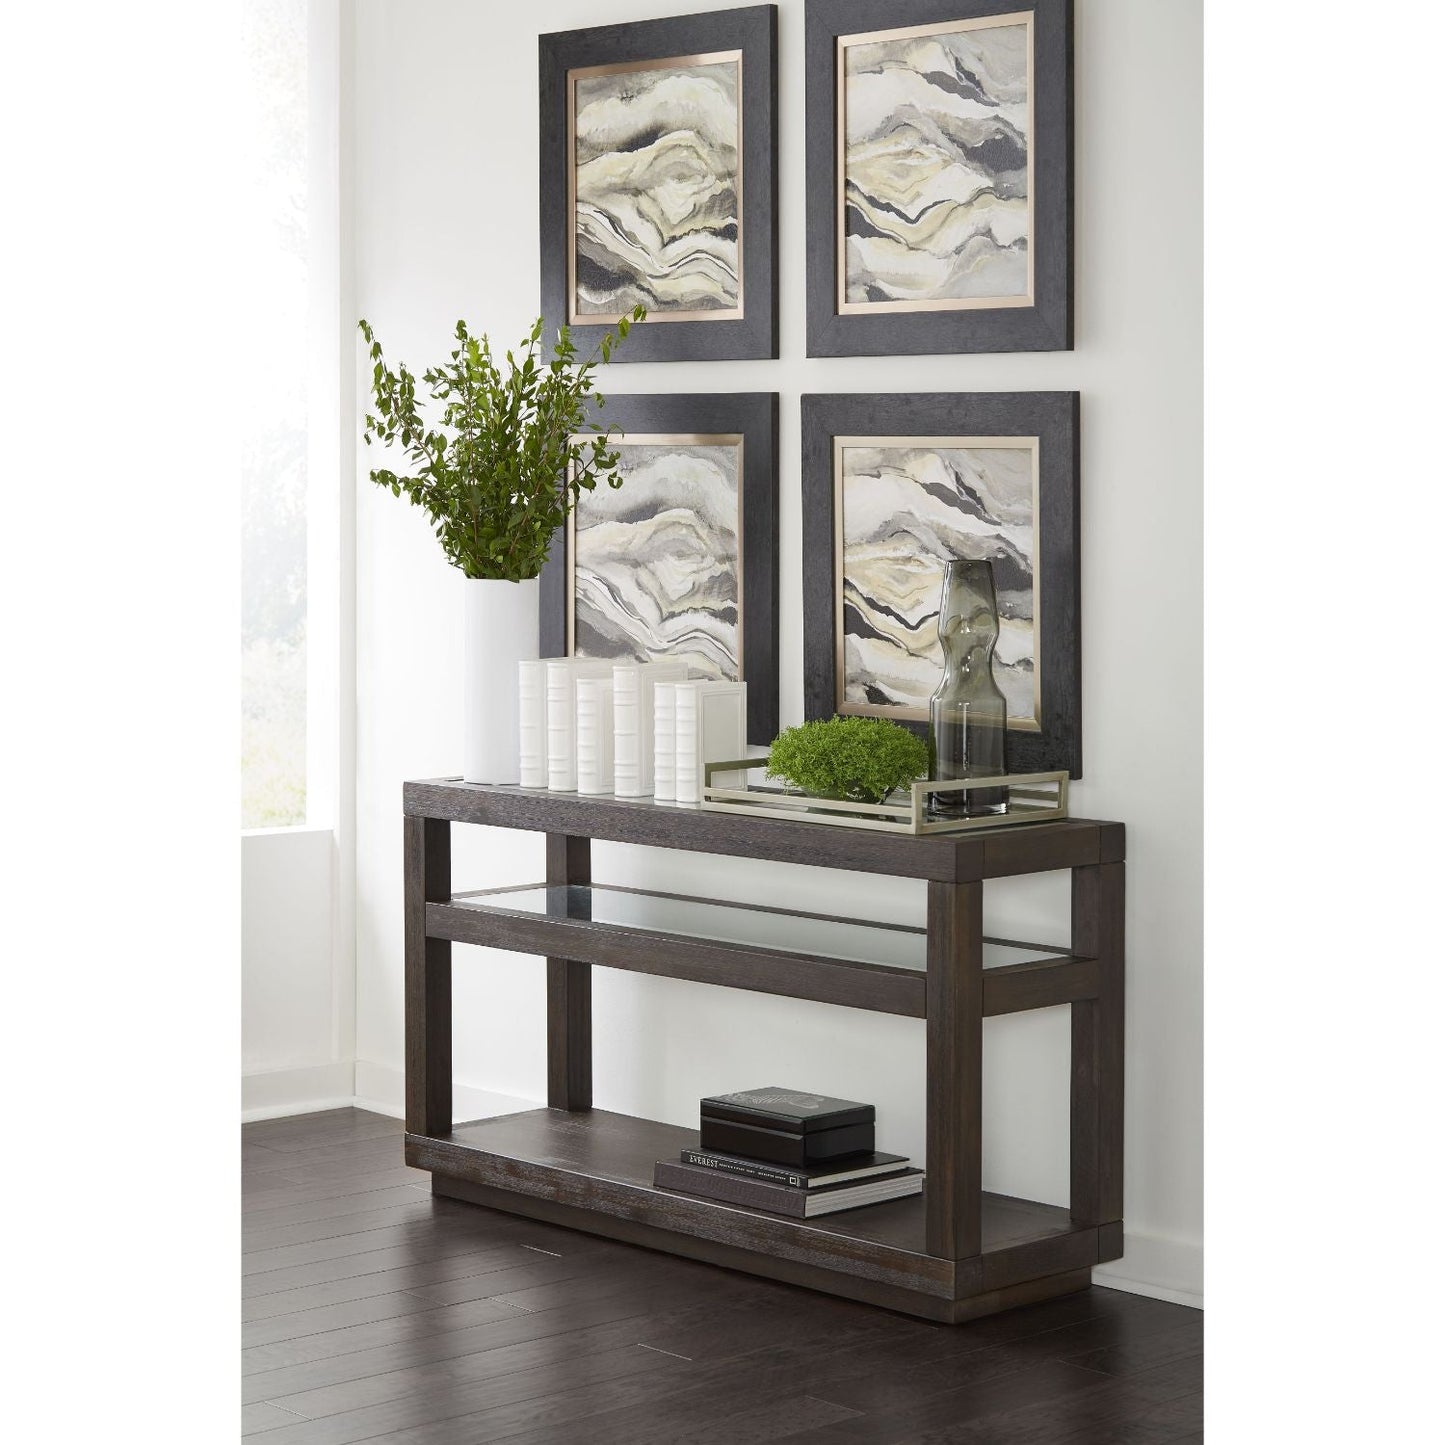 Modus Oxford 3PC Coffee, End & Console Table in Basalt Grey